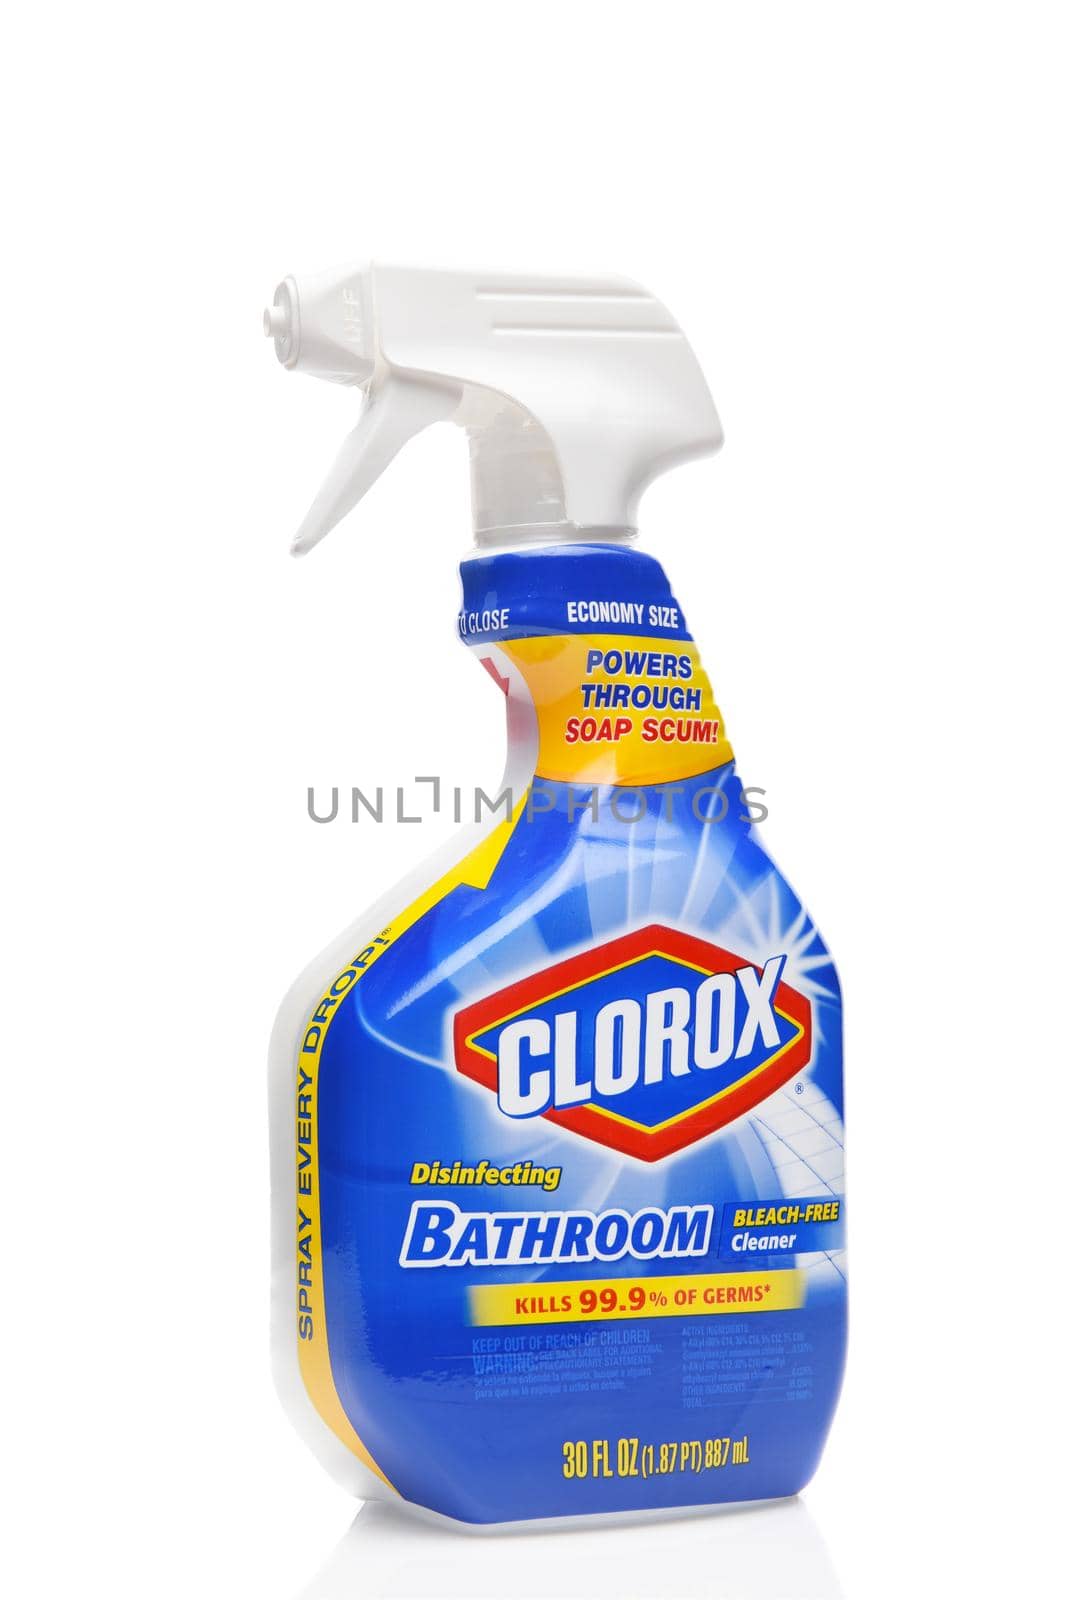 IRVINE, CALIFORNIA - AUGUST 20, 2019: A plastic spray bottle of Clorox Disinfecting Bathroom Cleaner.  by sCukrov